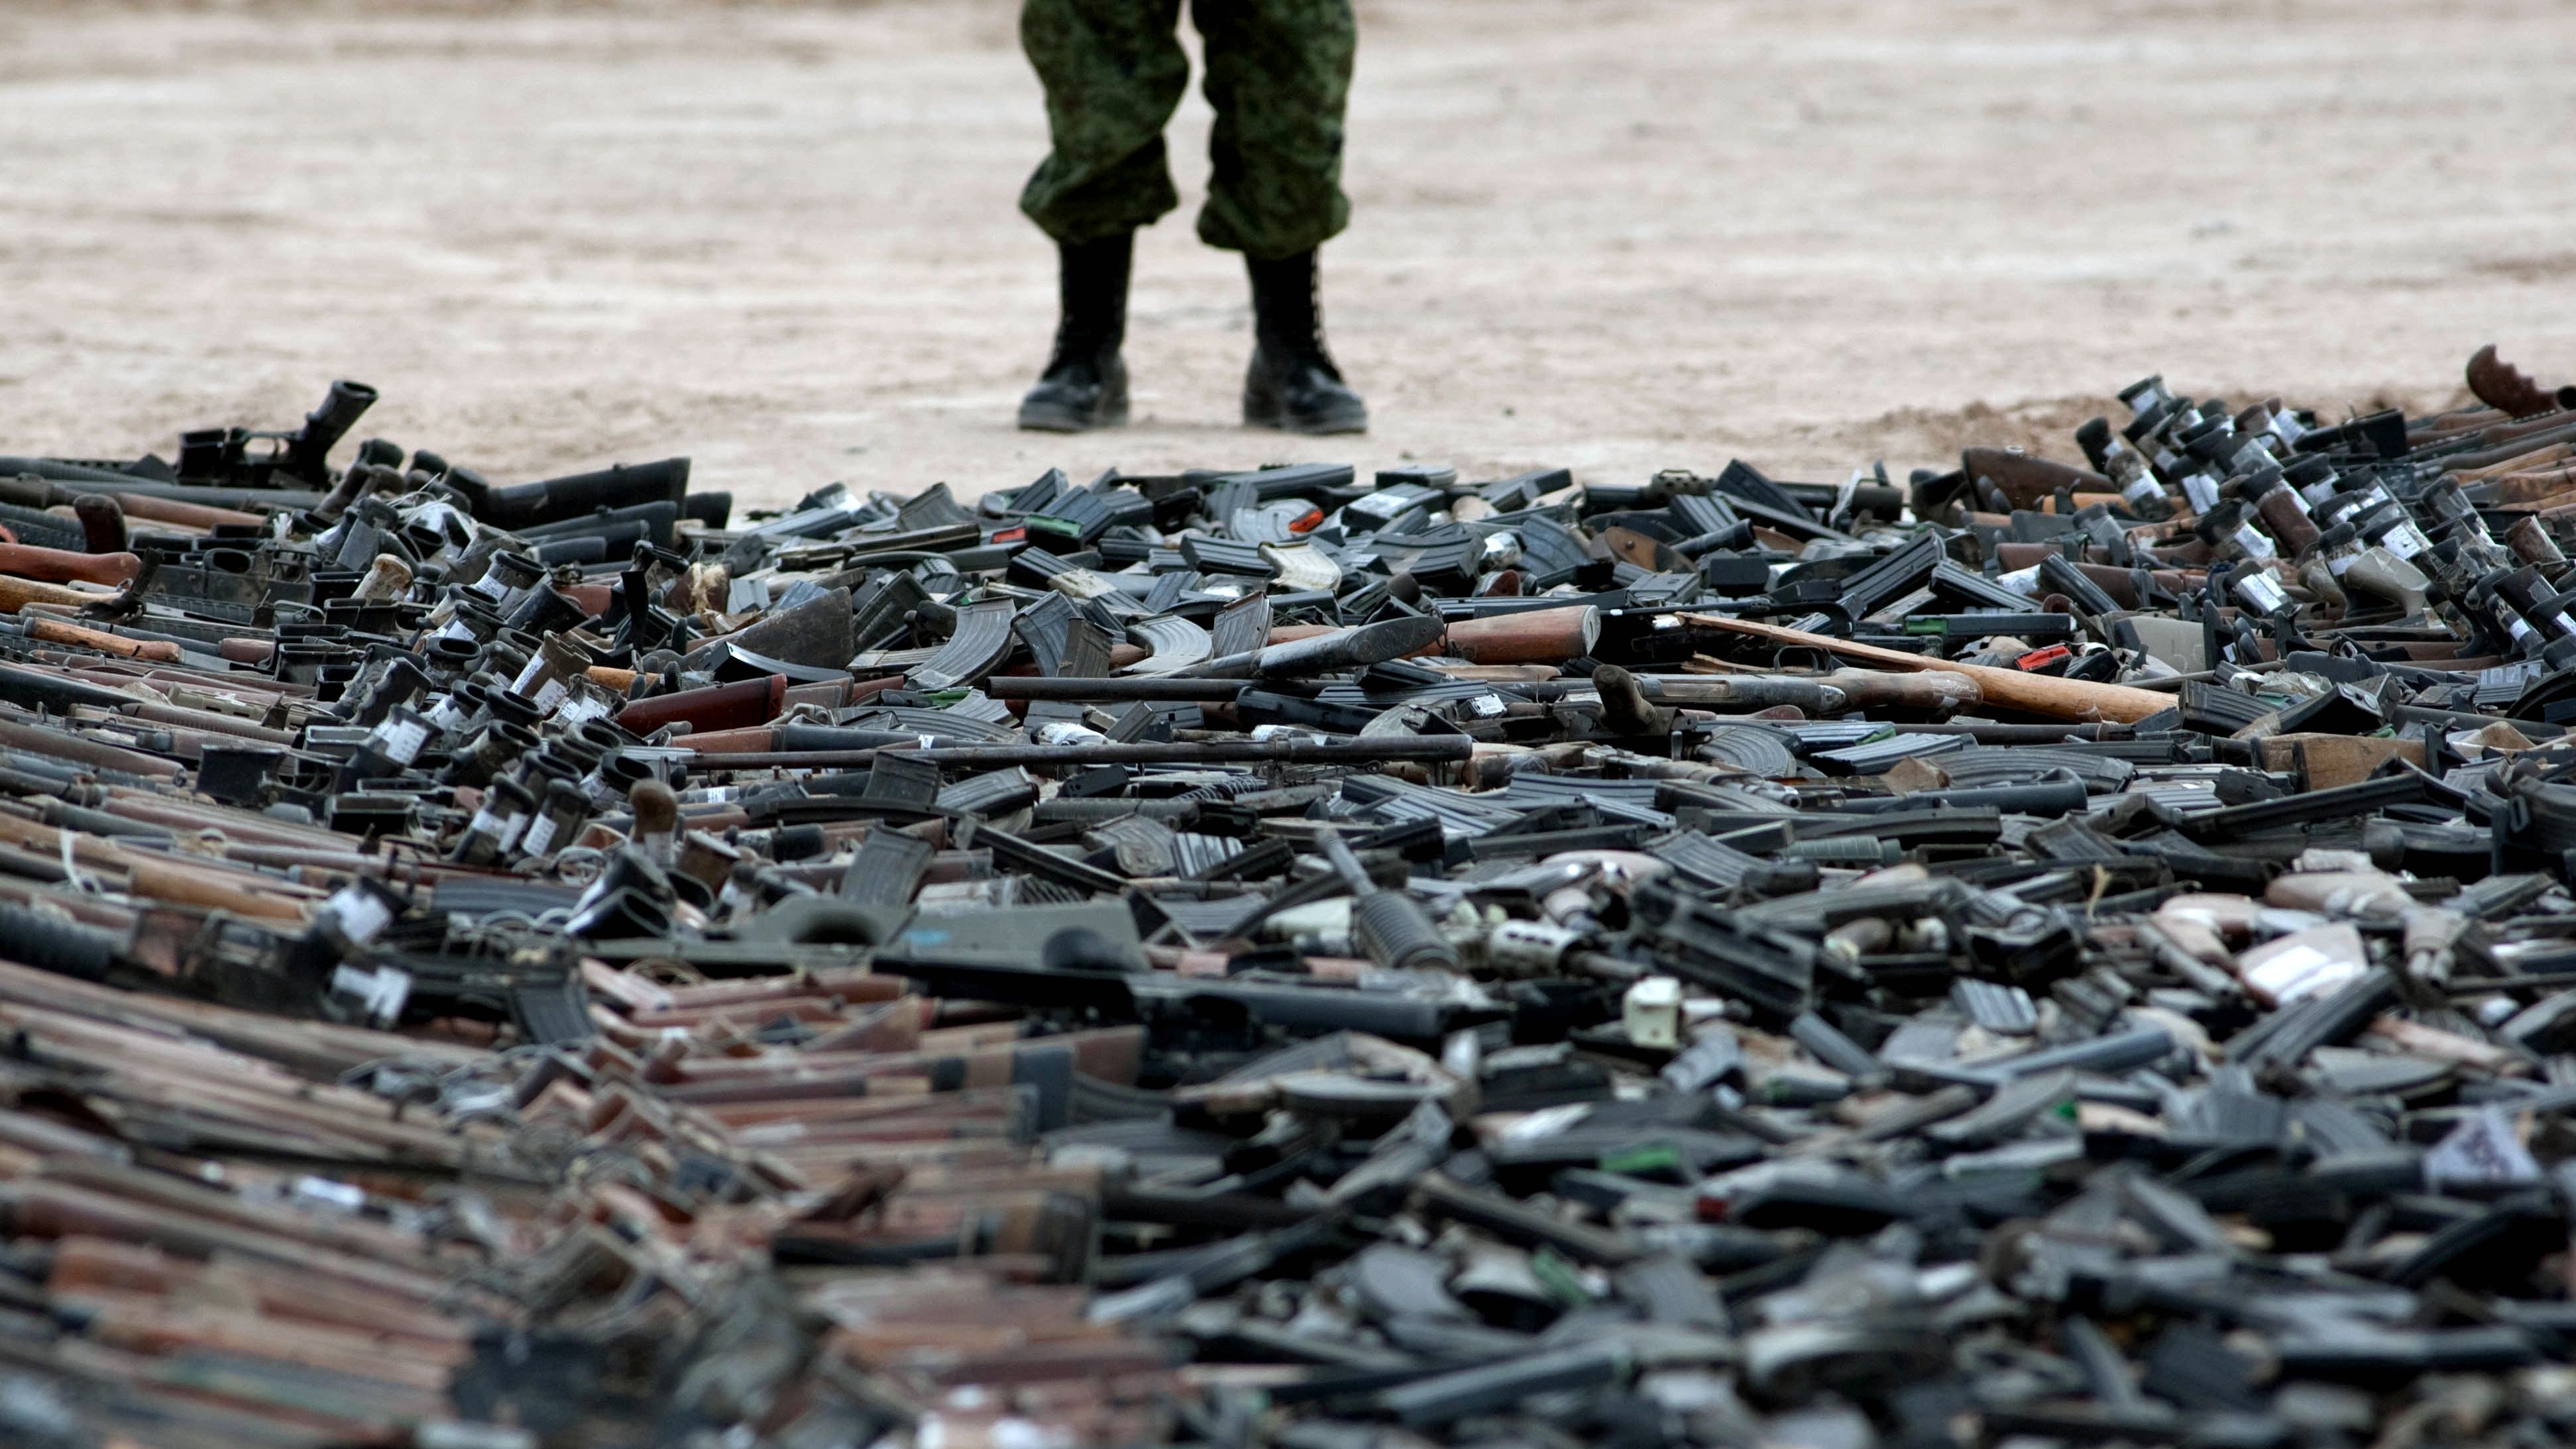 Thousands of guns lie on the ground before their destruction in Ciudad Juarez, Mexico, in February.